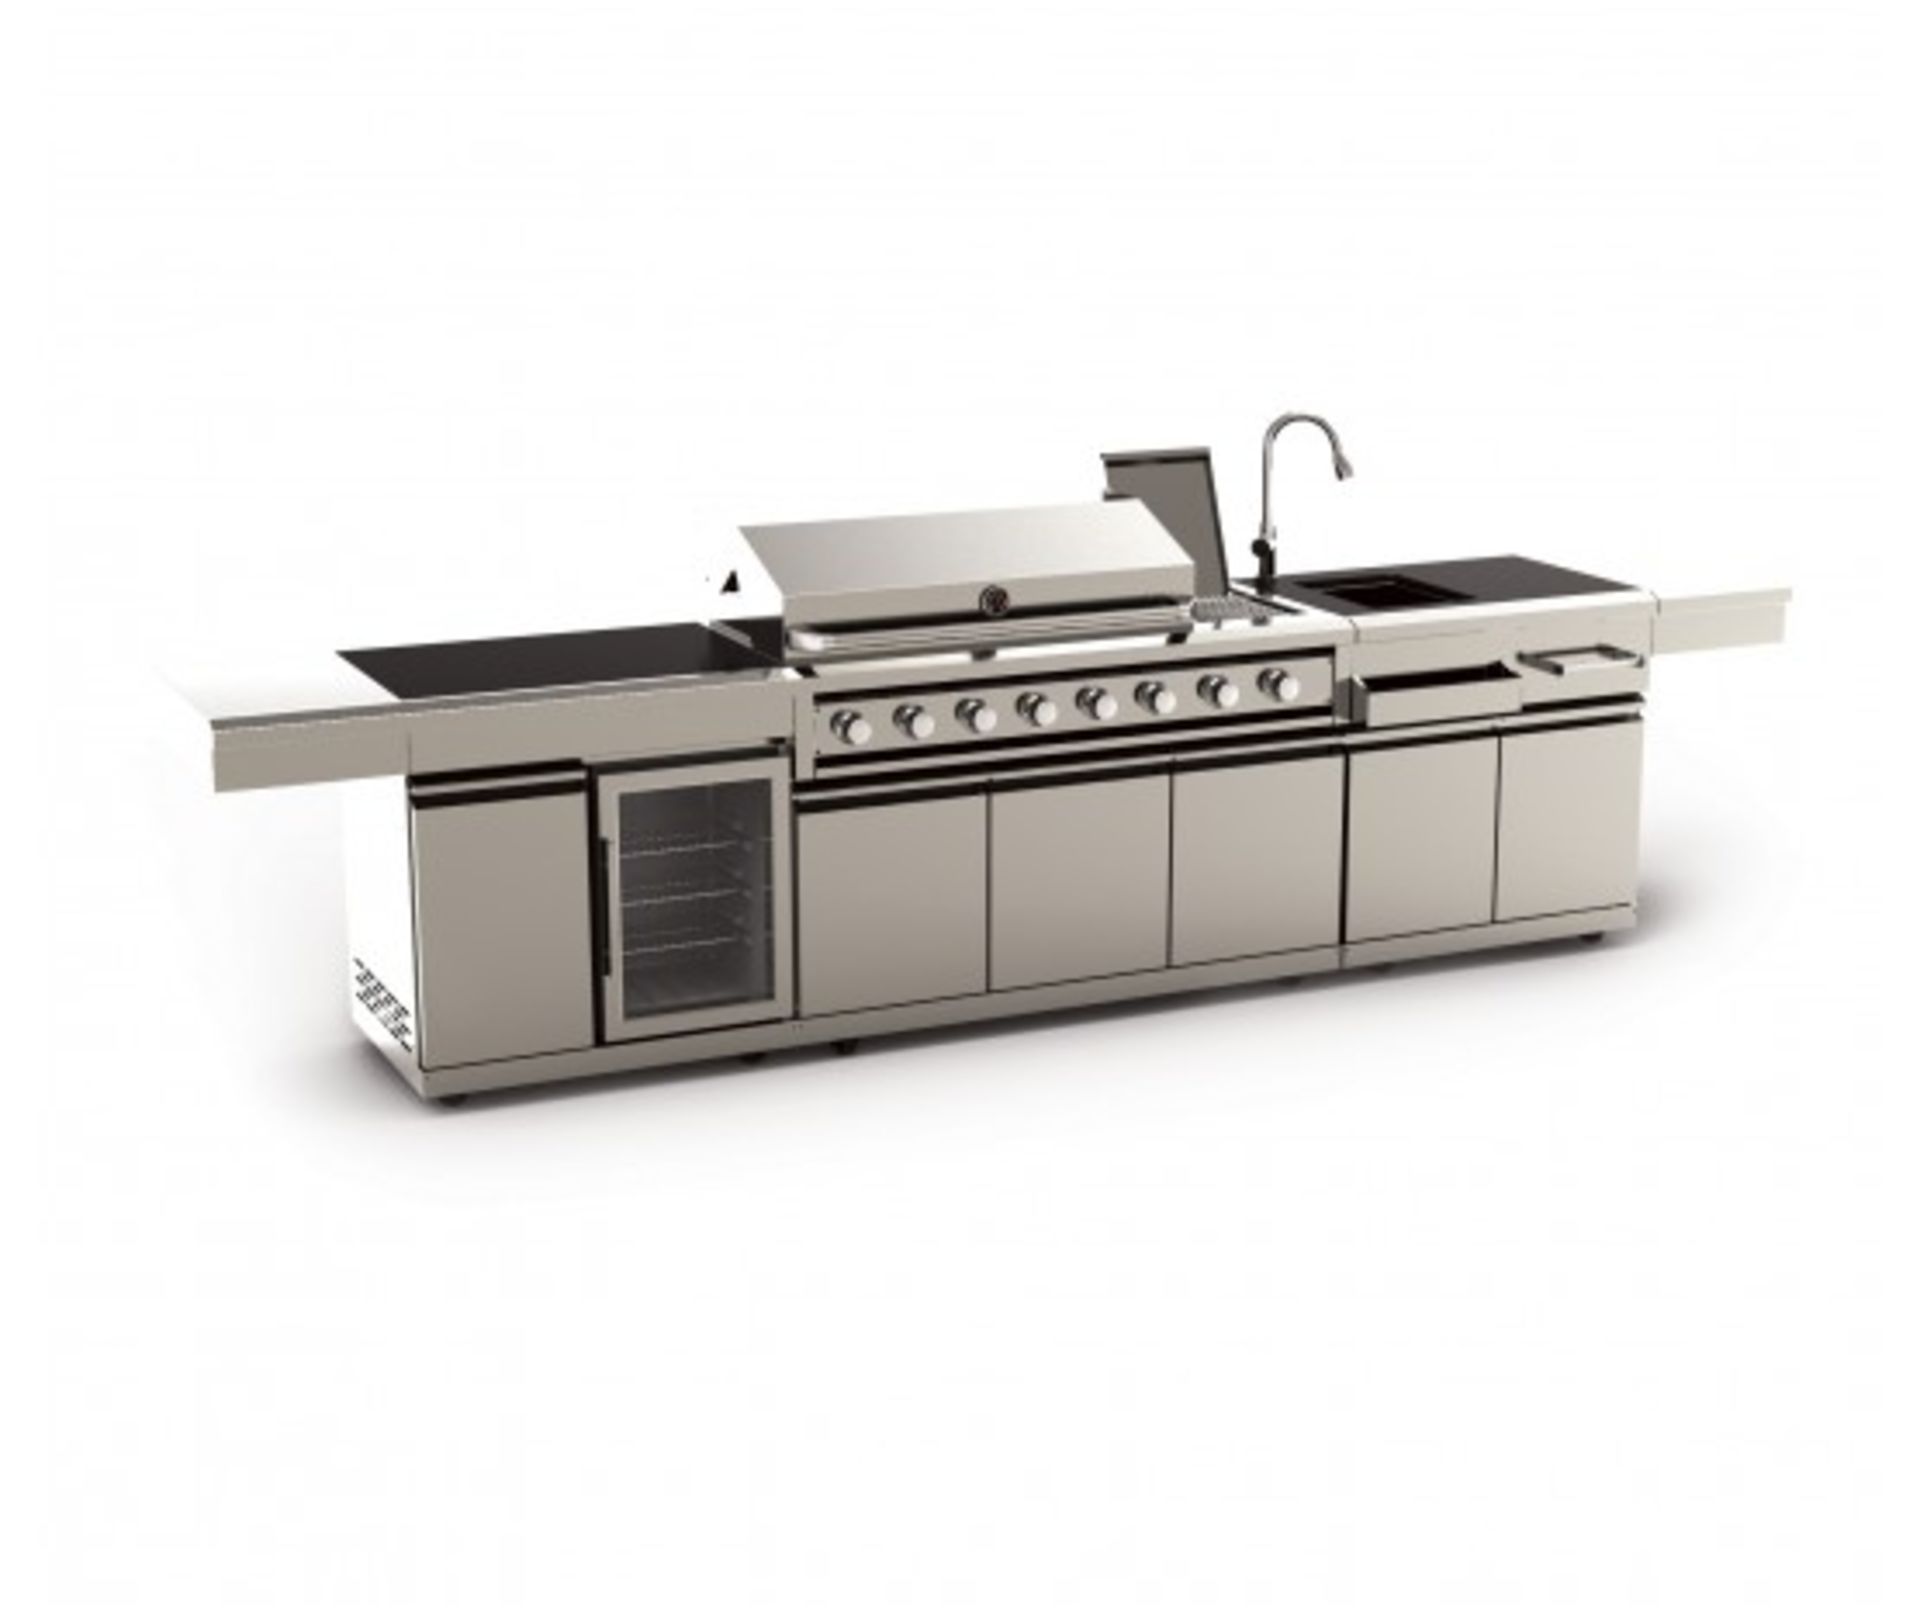 BBQ suite-gas bbq, sink and wine cooler + cabinets - 28.1kW - 3900W x 630D x 1160H - GAS -